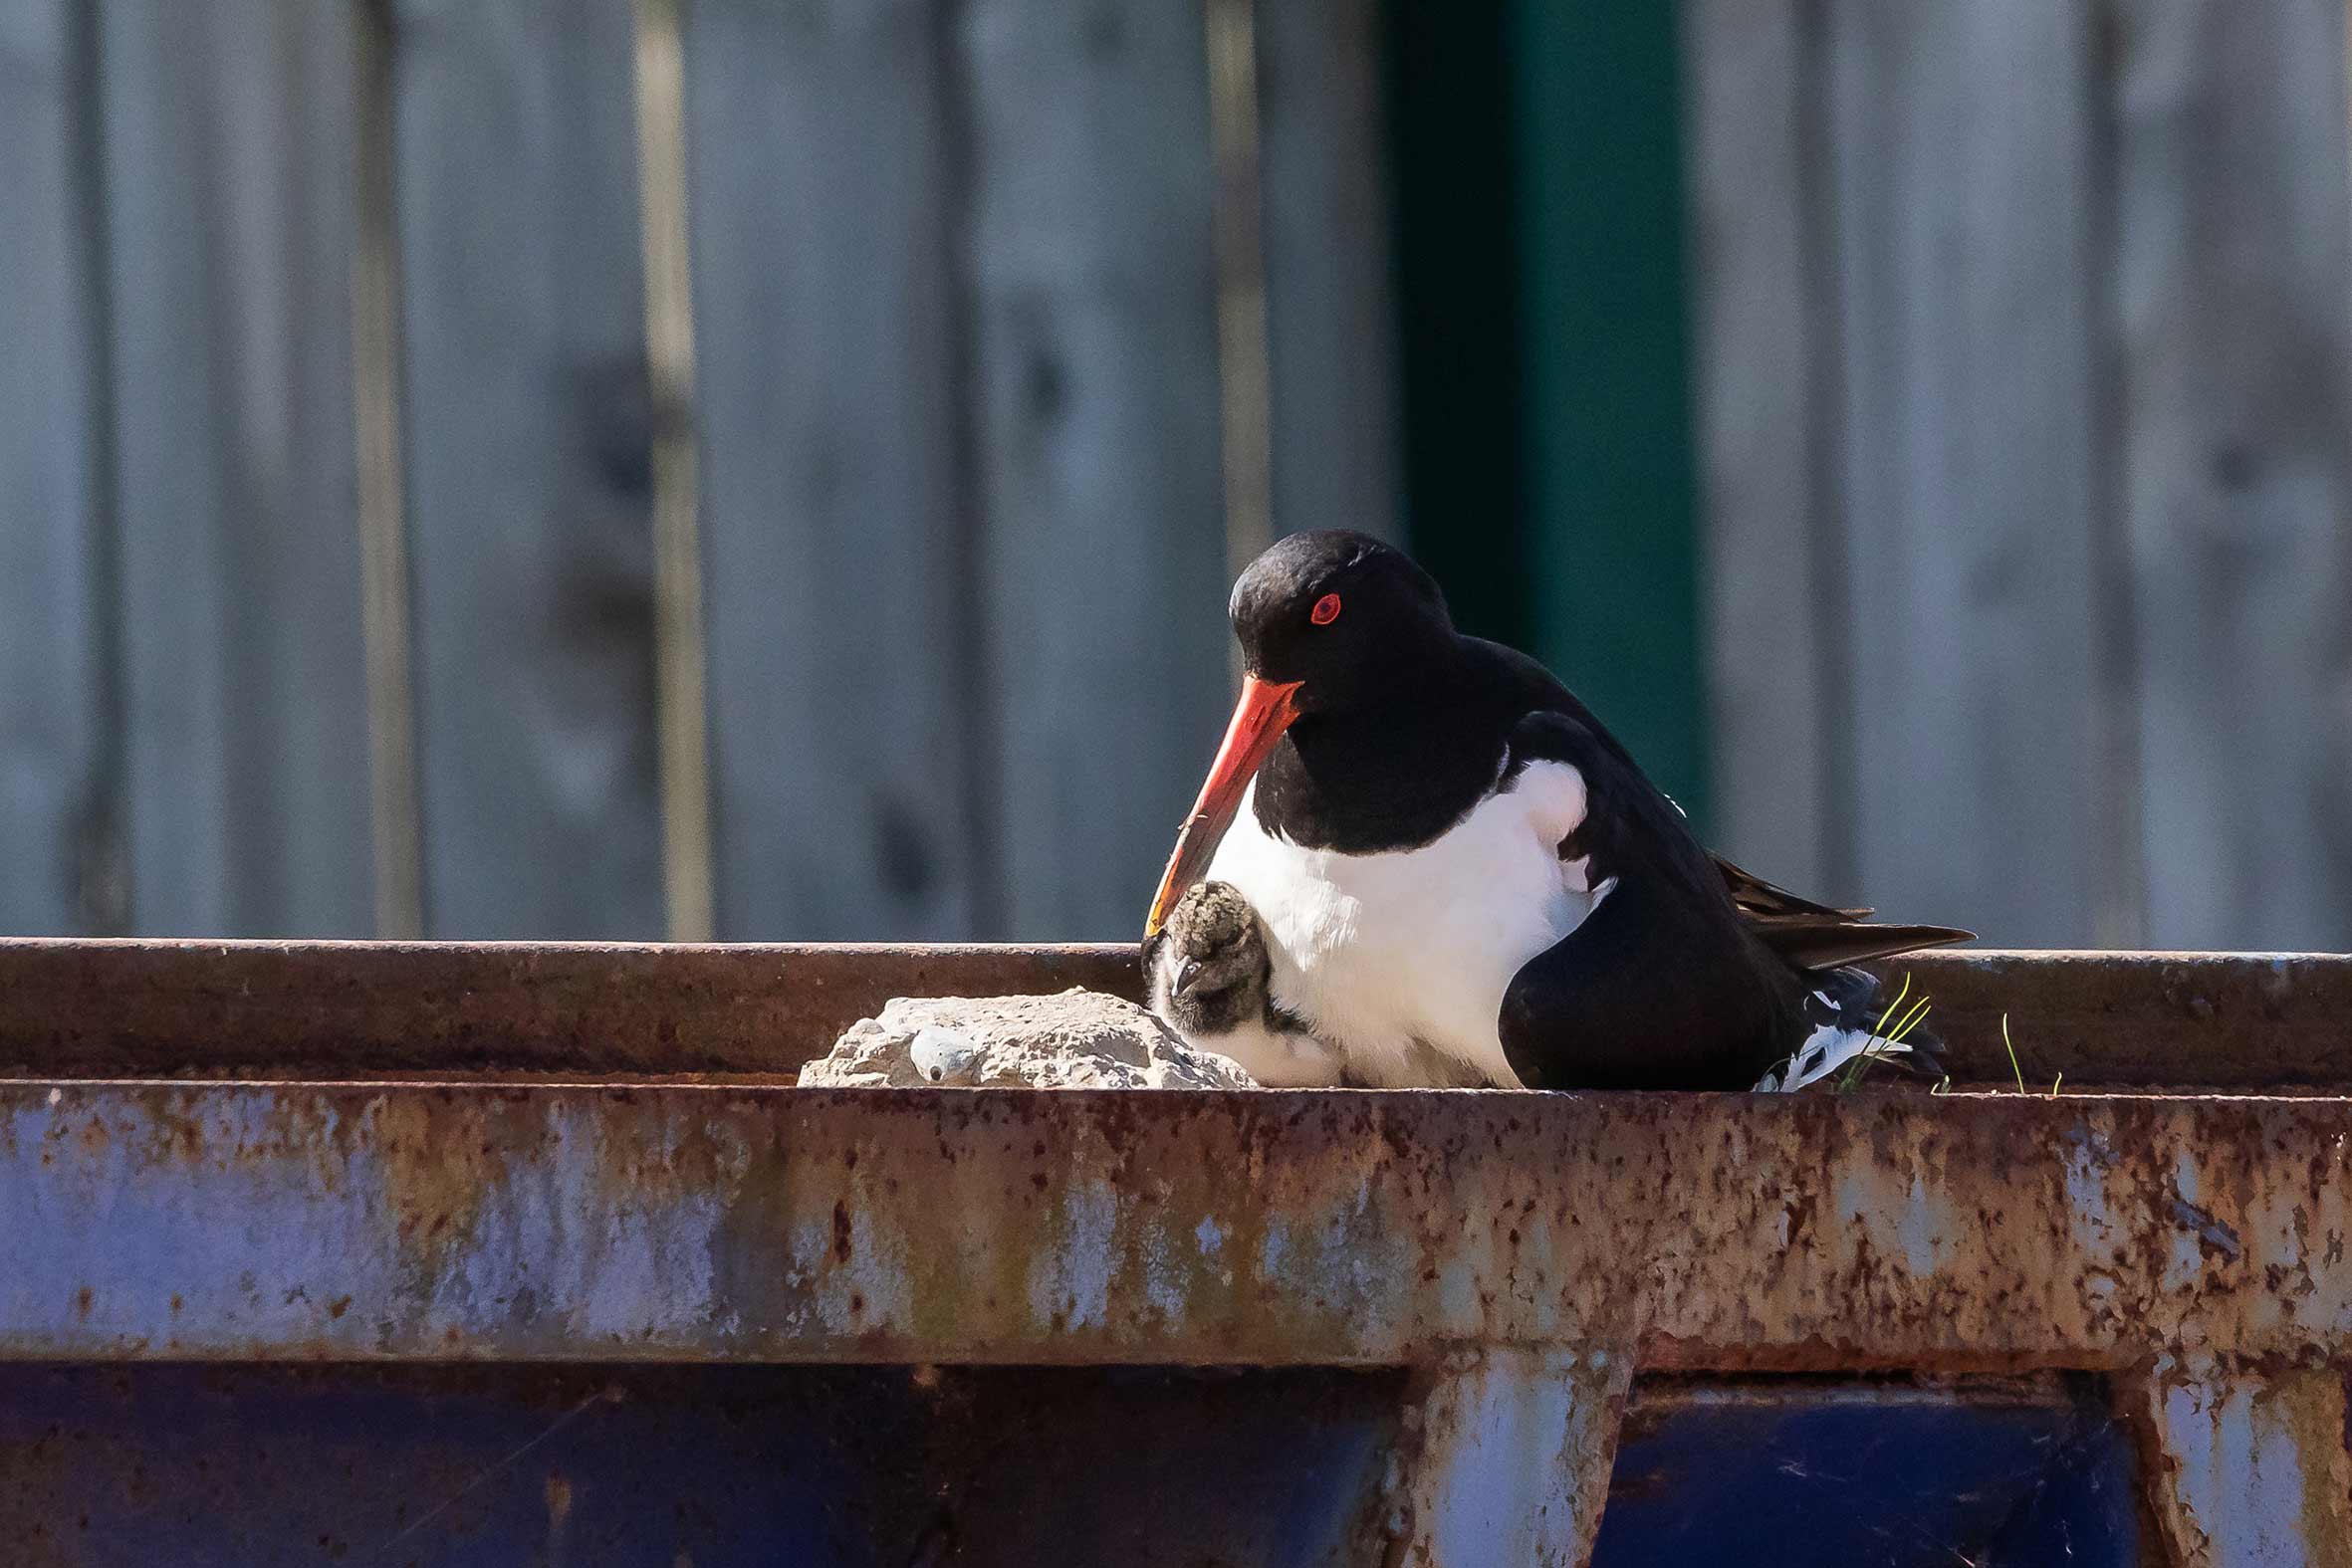 The oystercatcher with the chick on the skip